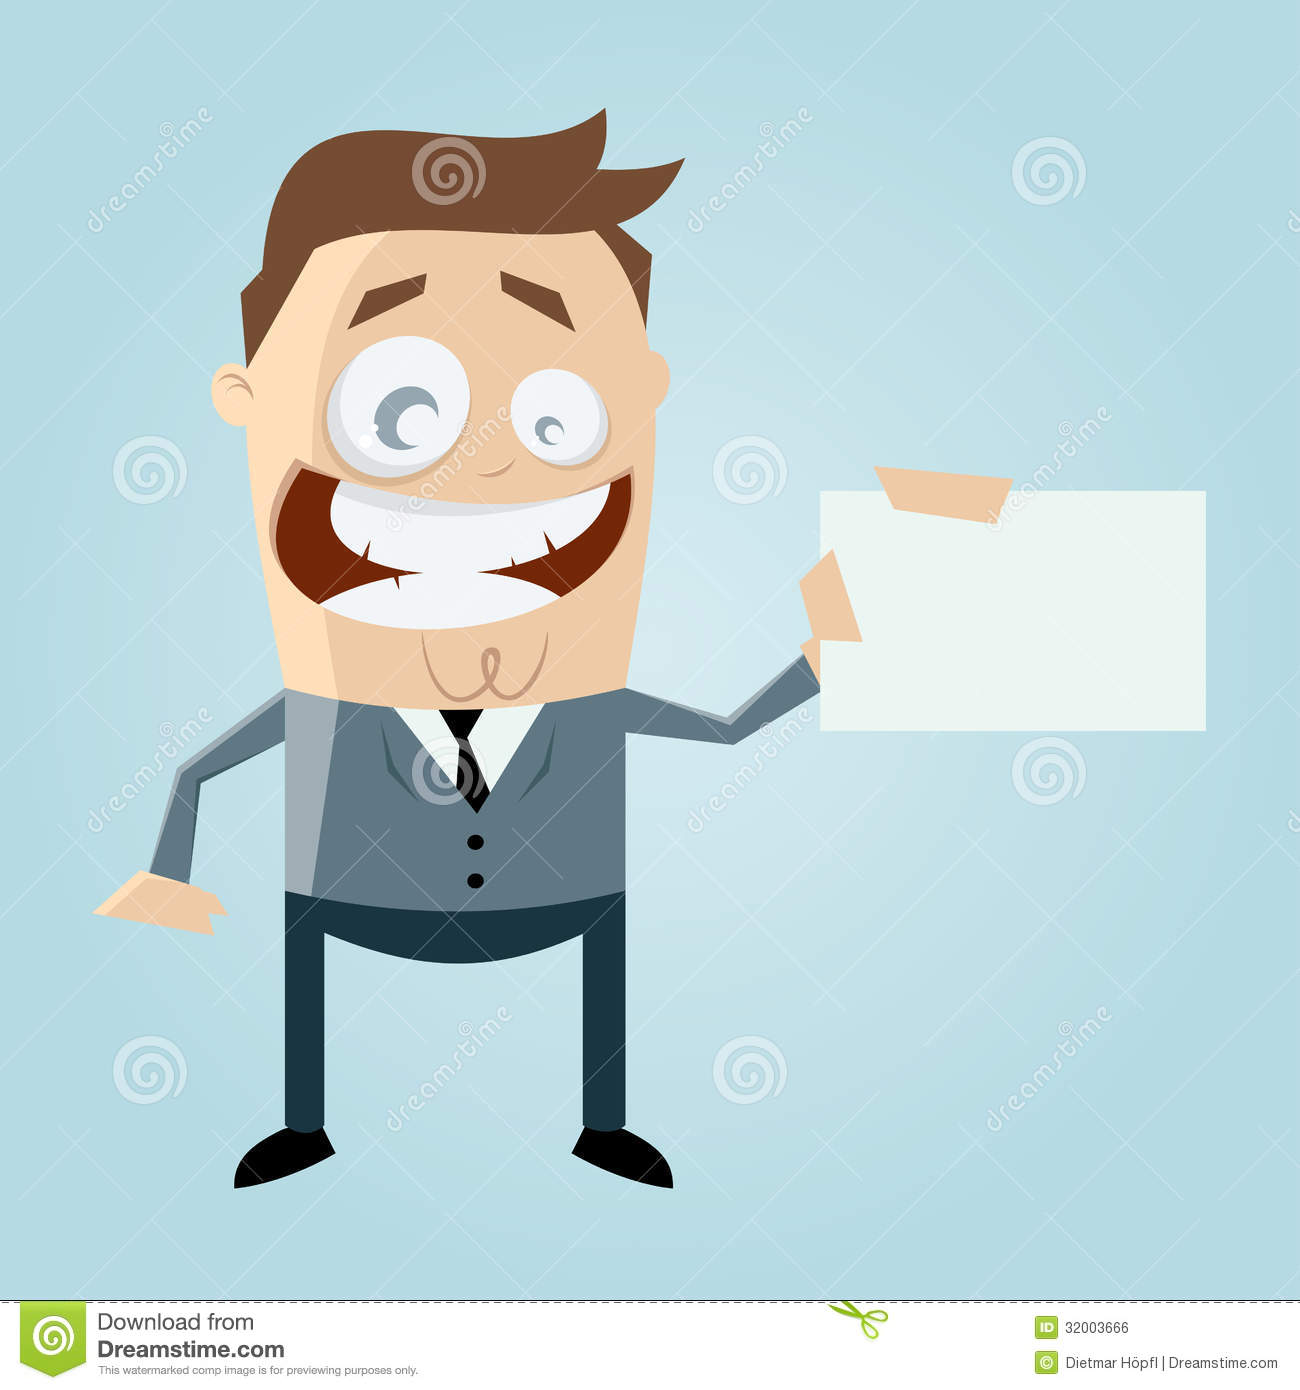 Cartoon Man With Business Card Royalty Free Stock Image   Image    